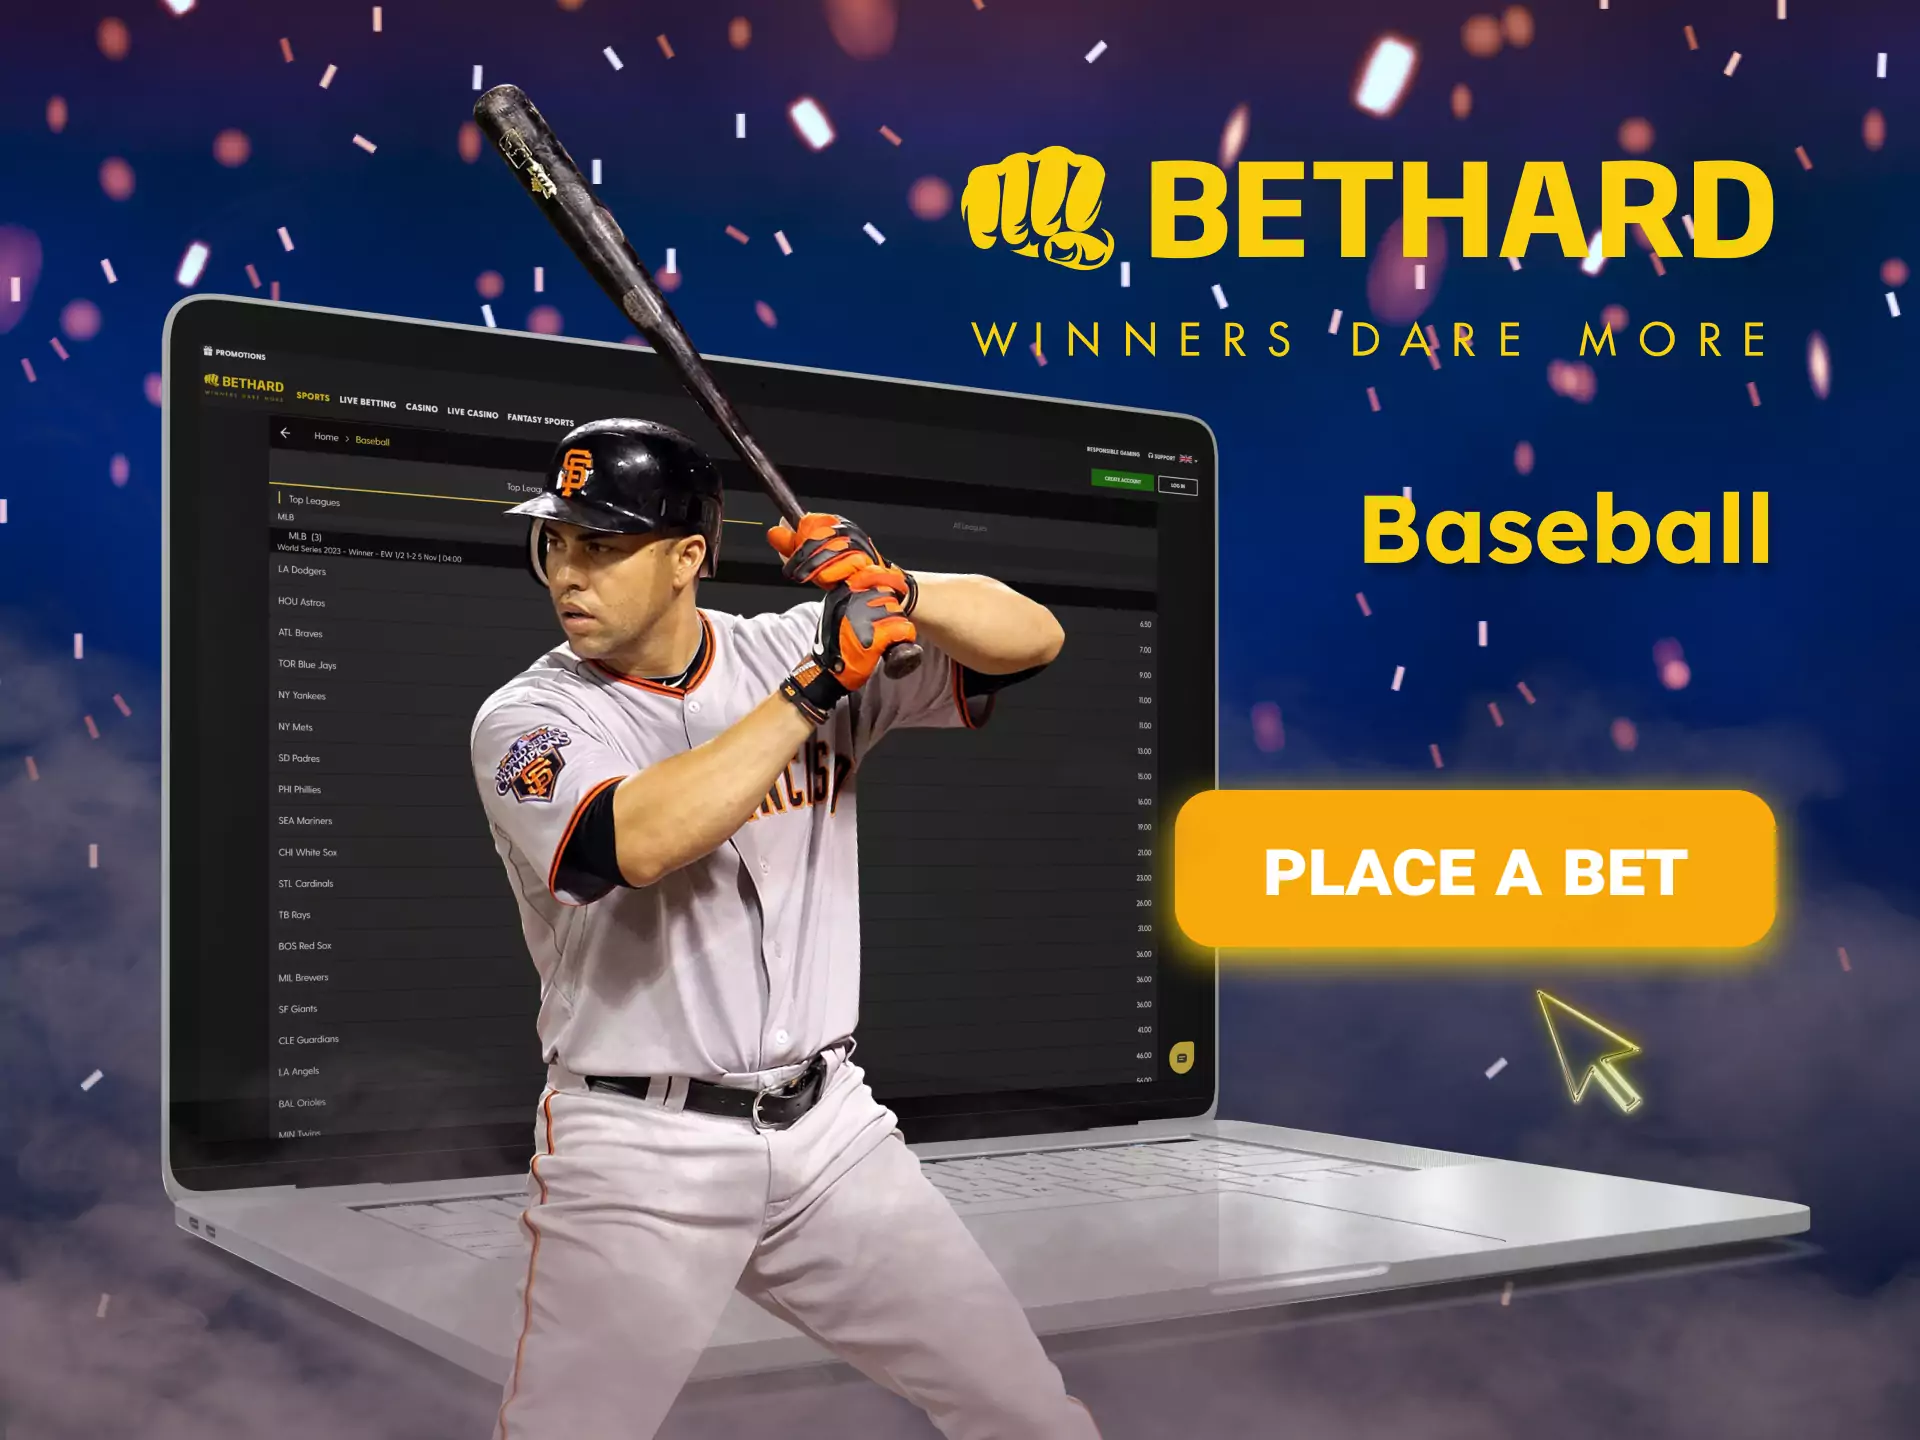 Place bets to support your favorite baseball team with Bethard.